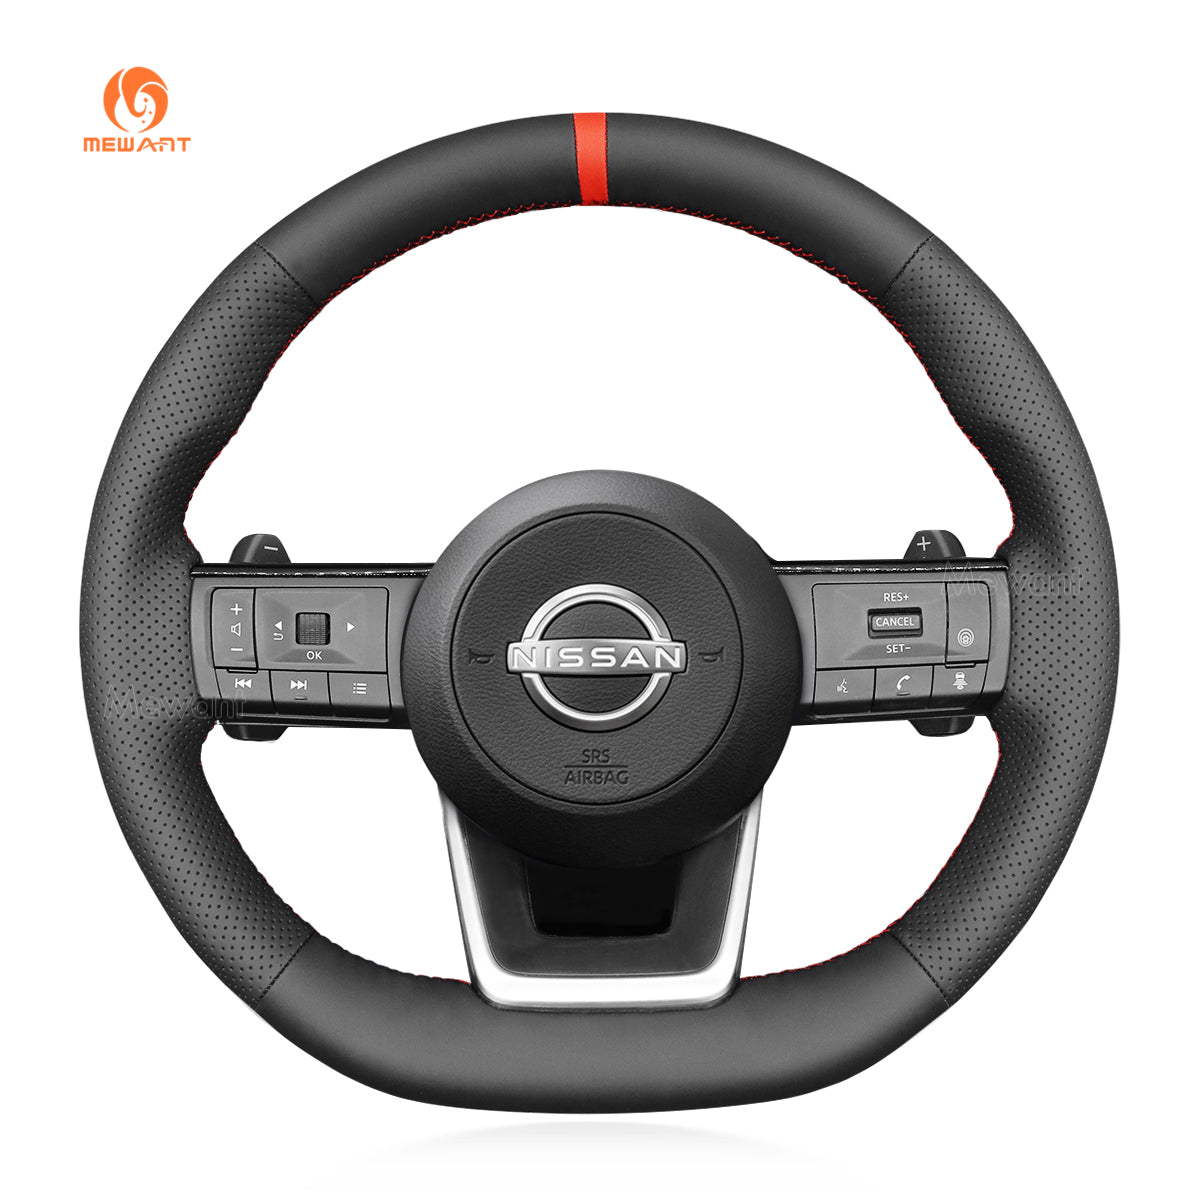 MEWANT Leather Car Steering Wheel Cover for Nissan Rogue / Pathfinder / Qashqai III(J12) / X-Trail IV(T33)